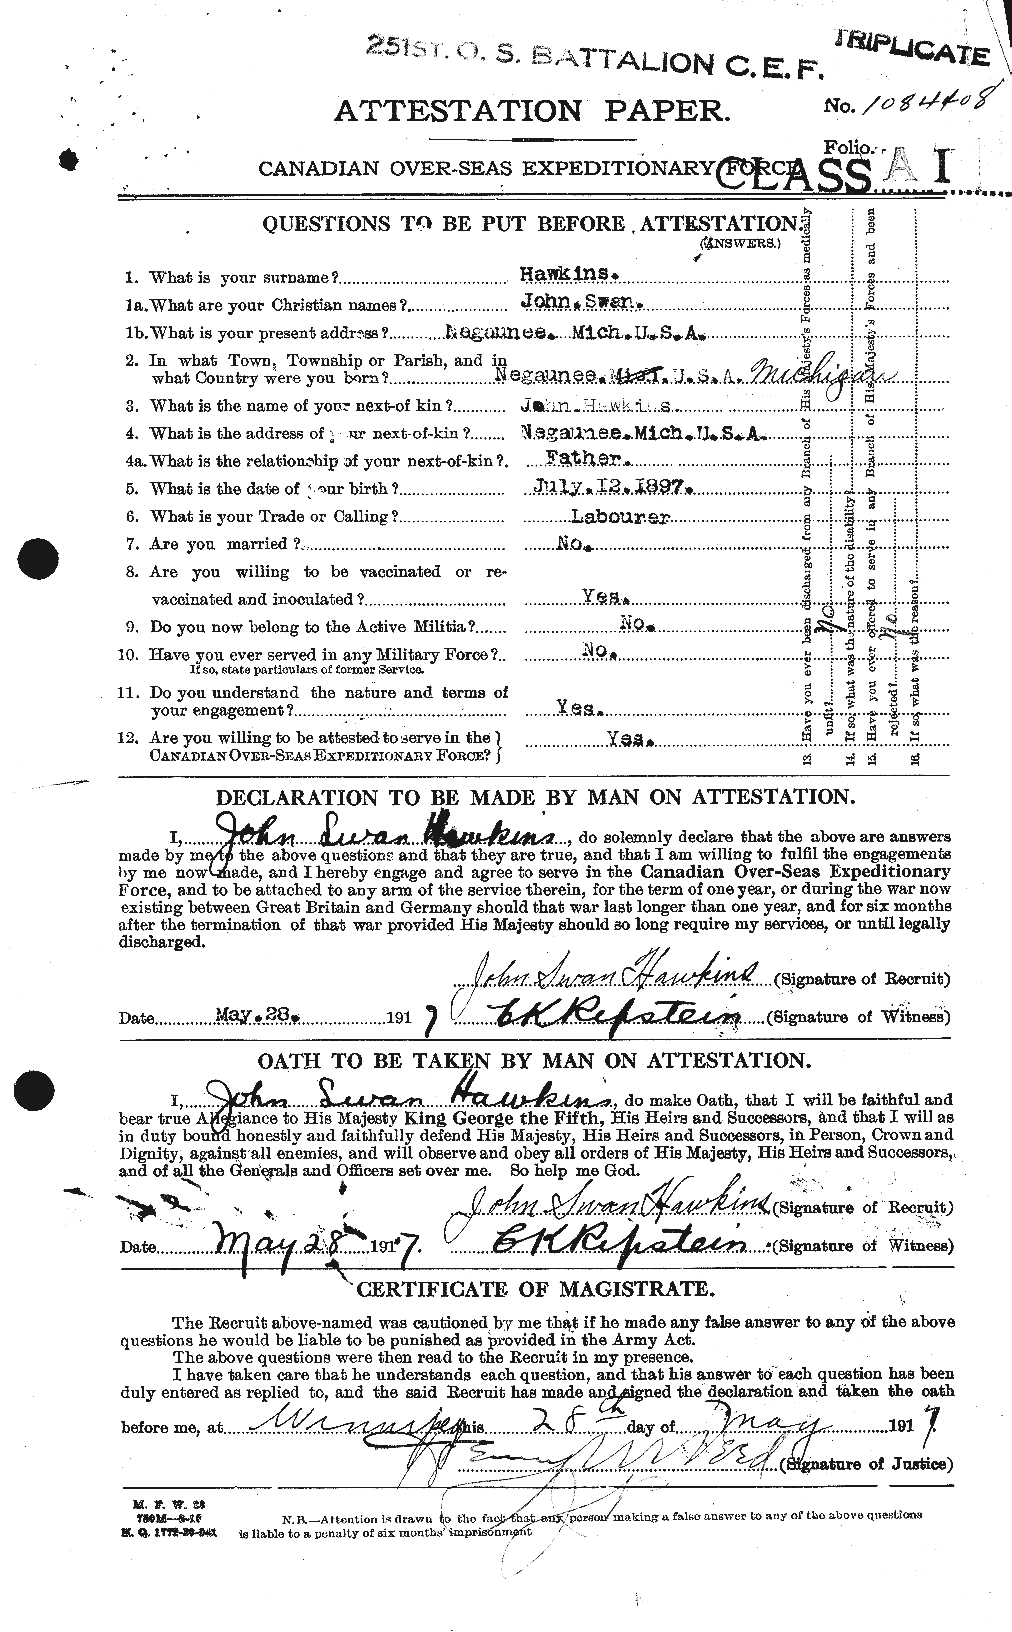 Personnel Records of the First World War - CEF 387198a